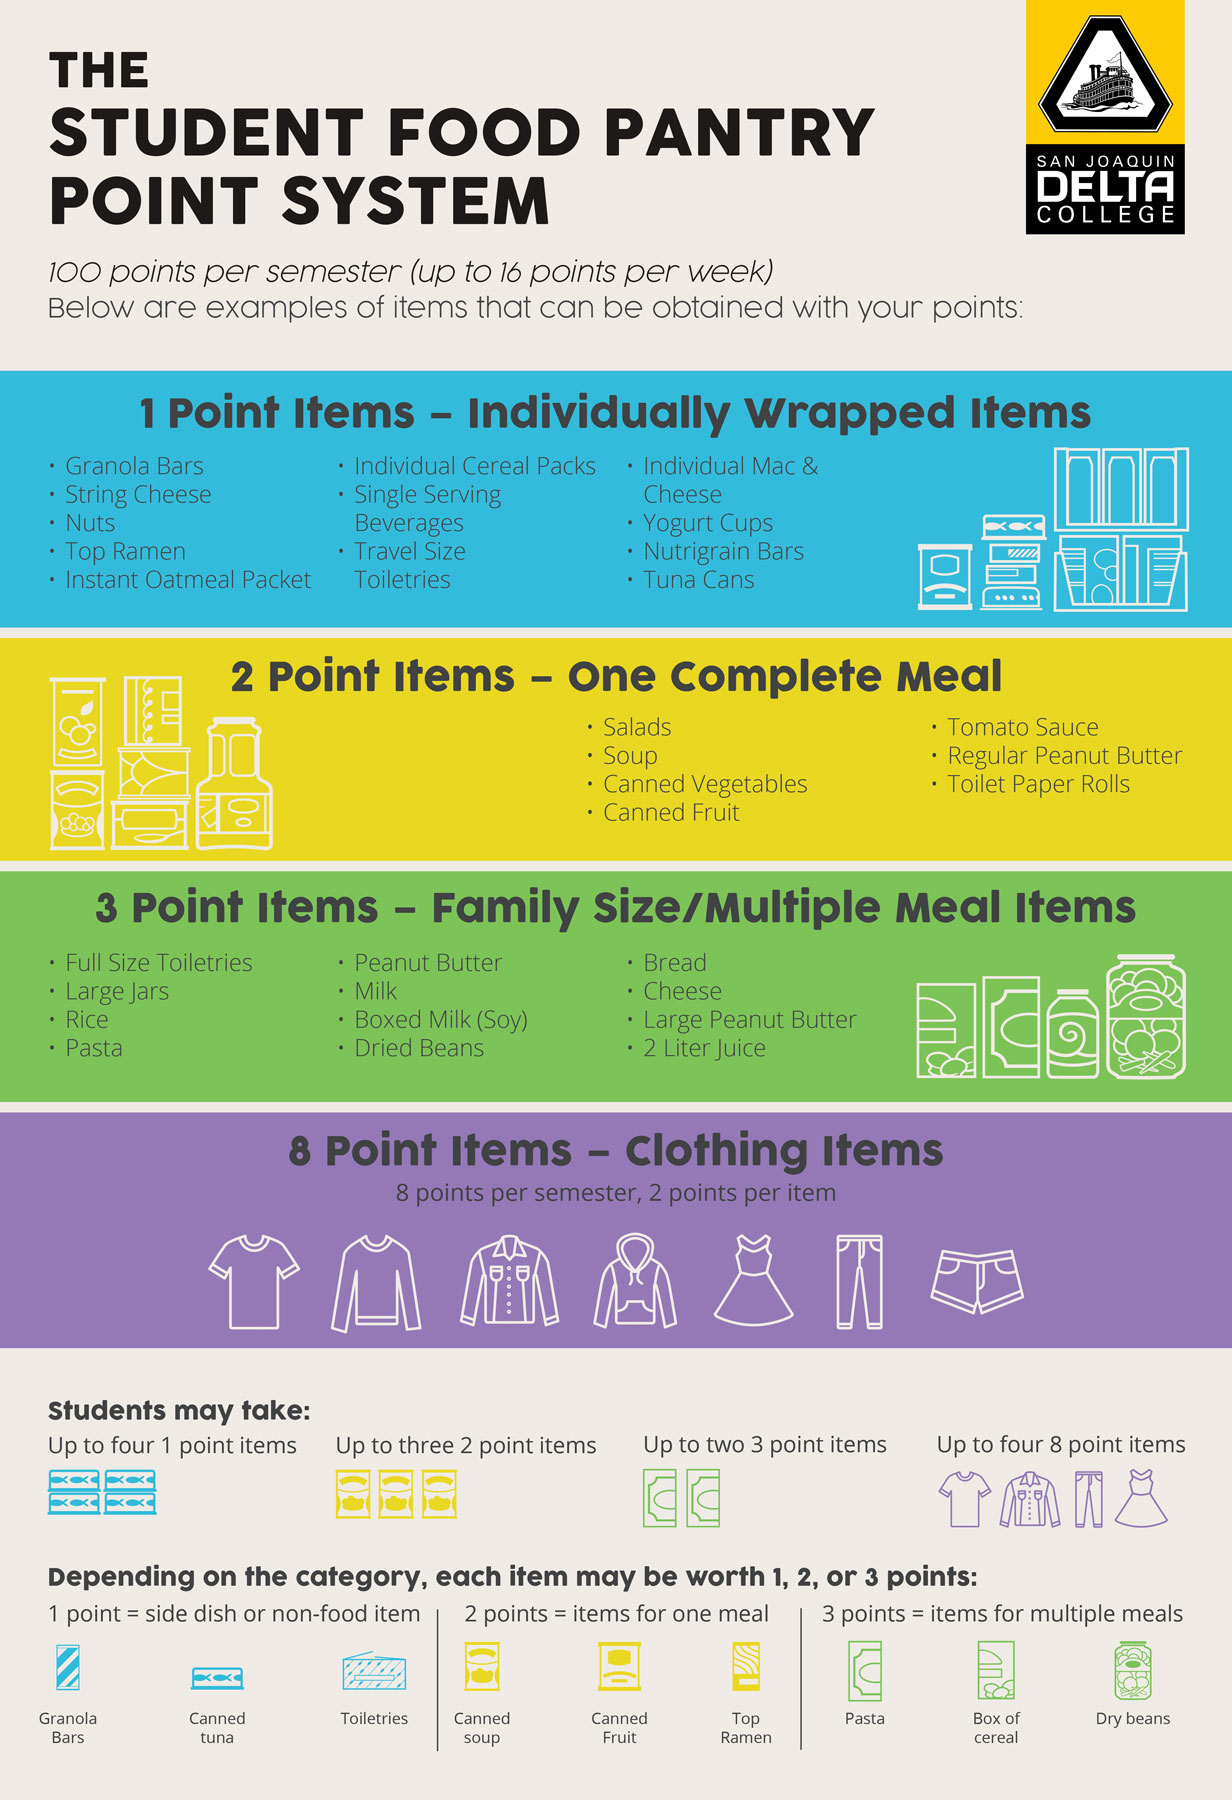 Food Pantry points system chart.